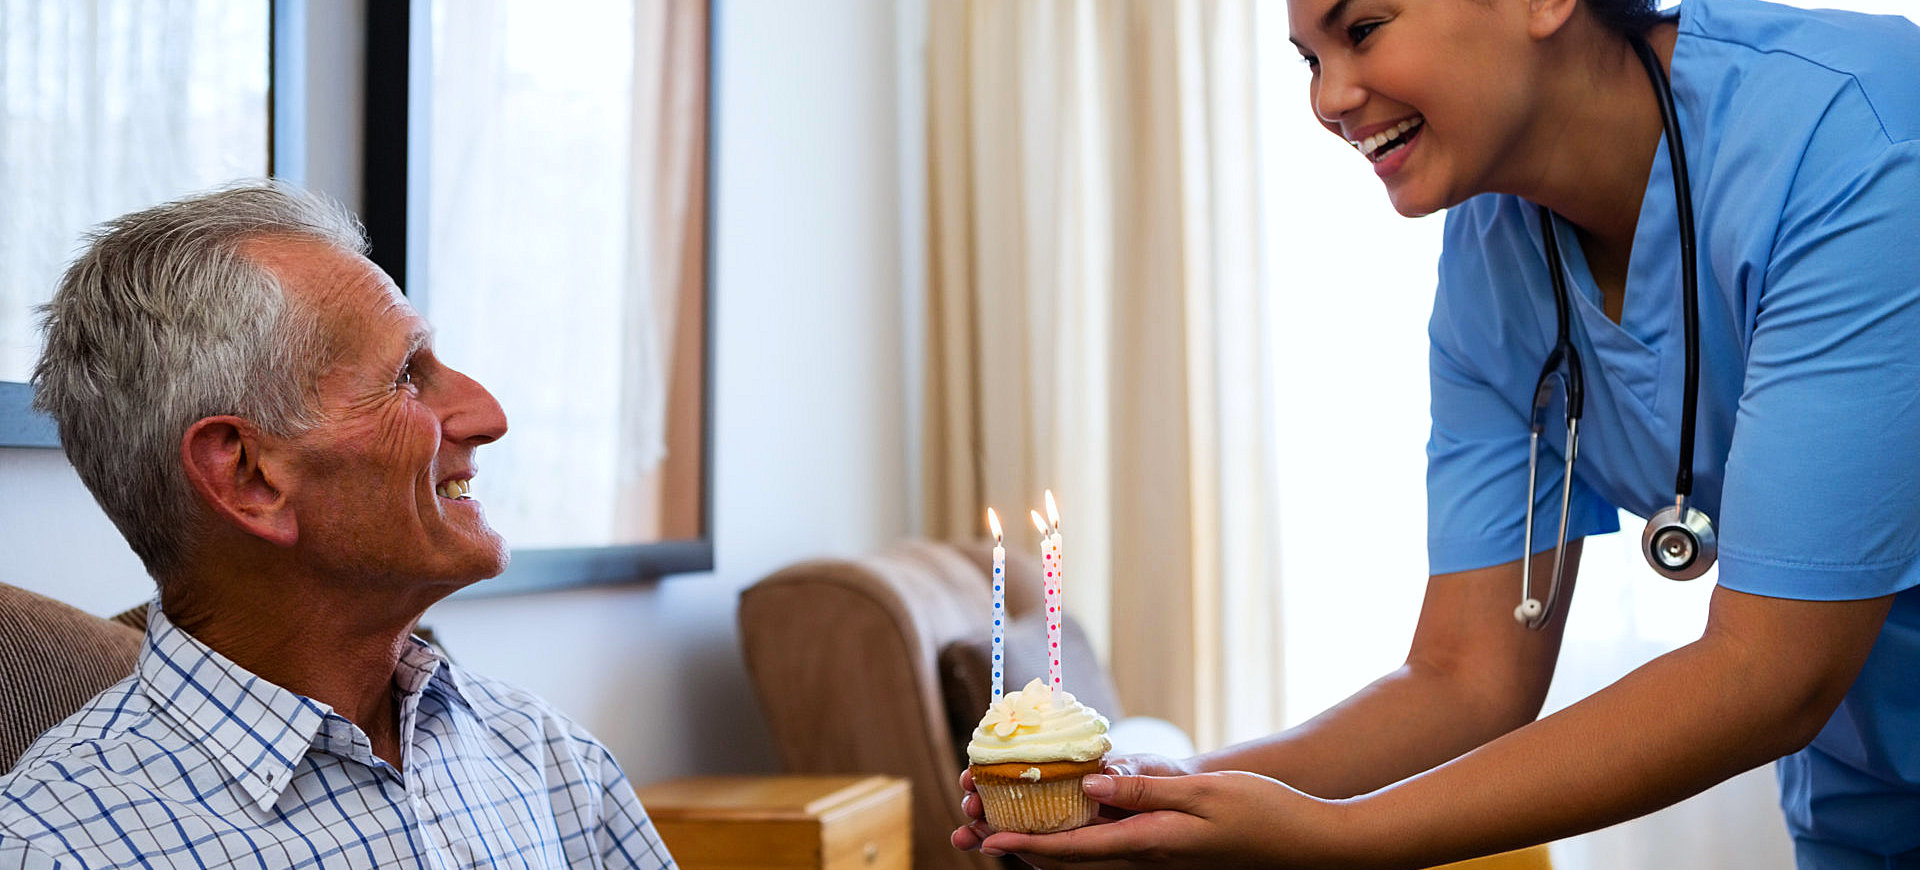 caregiver give a cupcake with candle light at top to senior man smiling